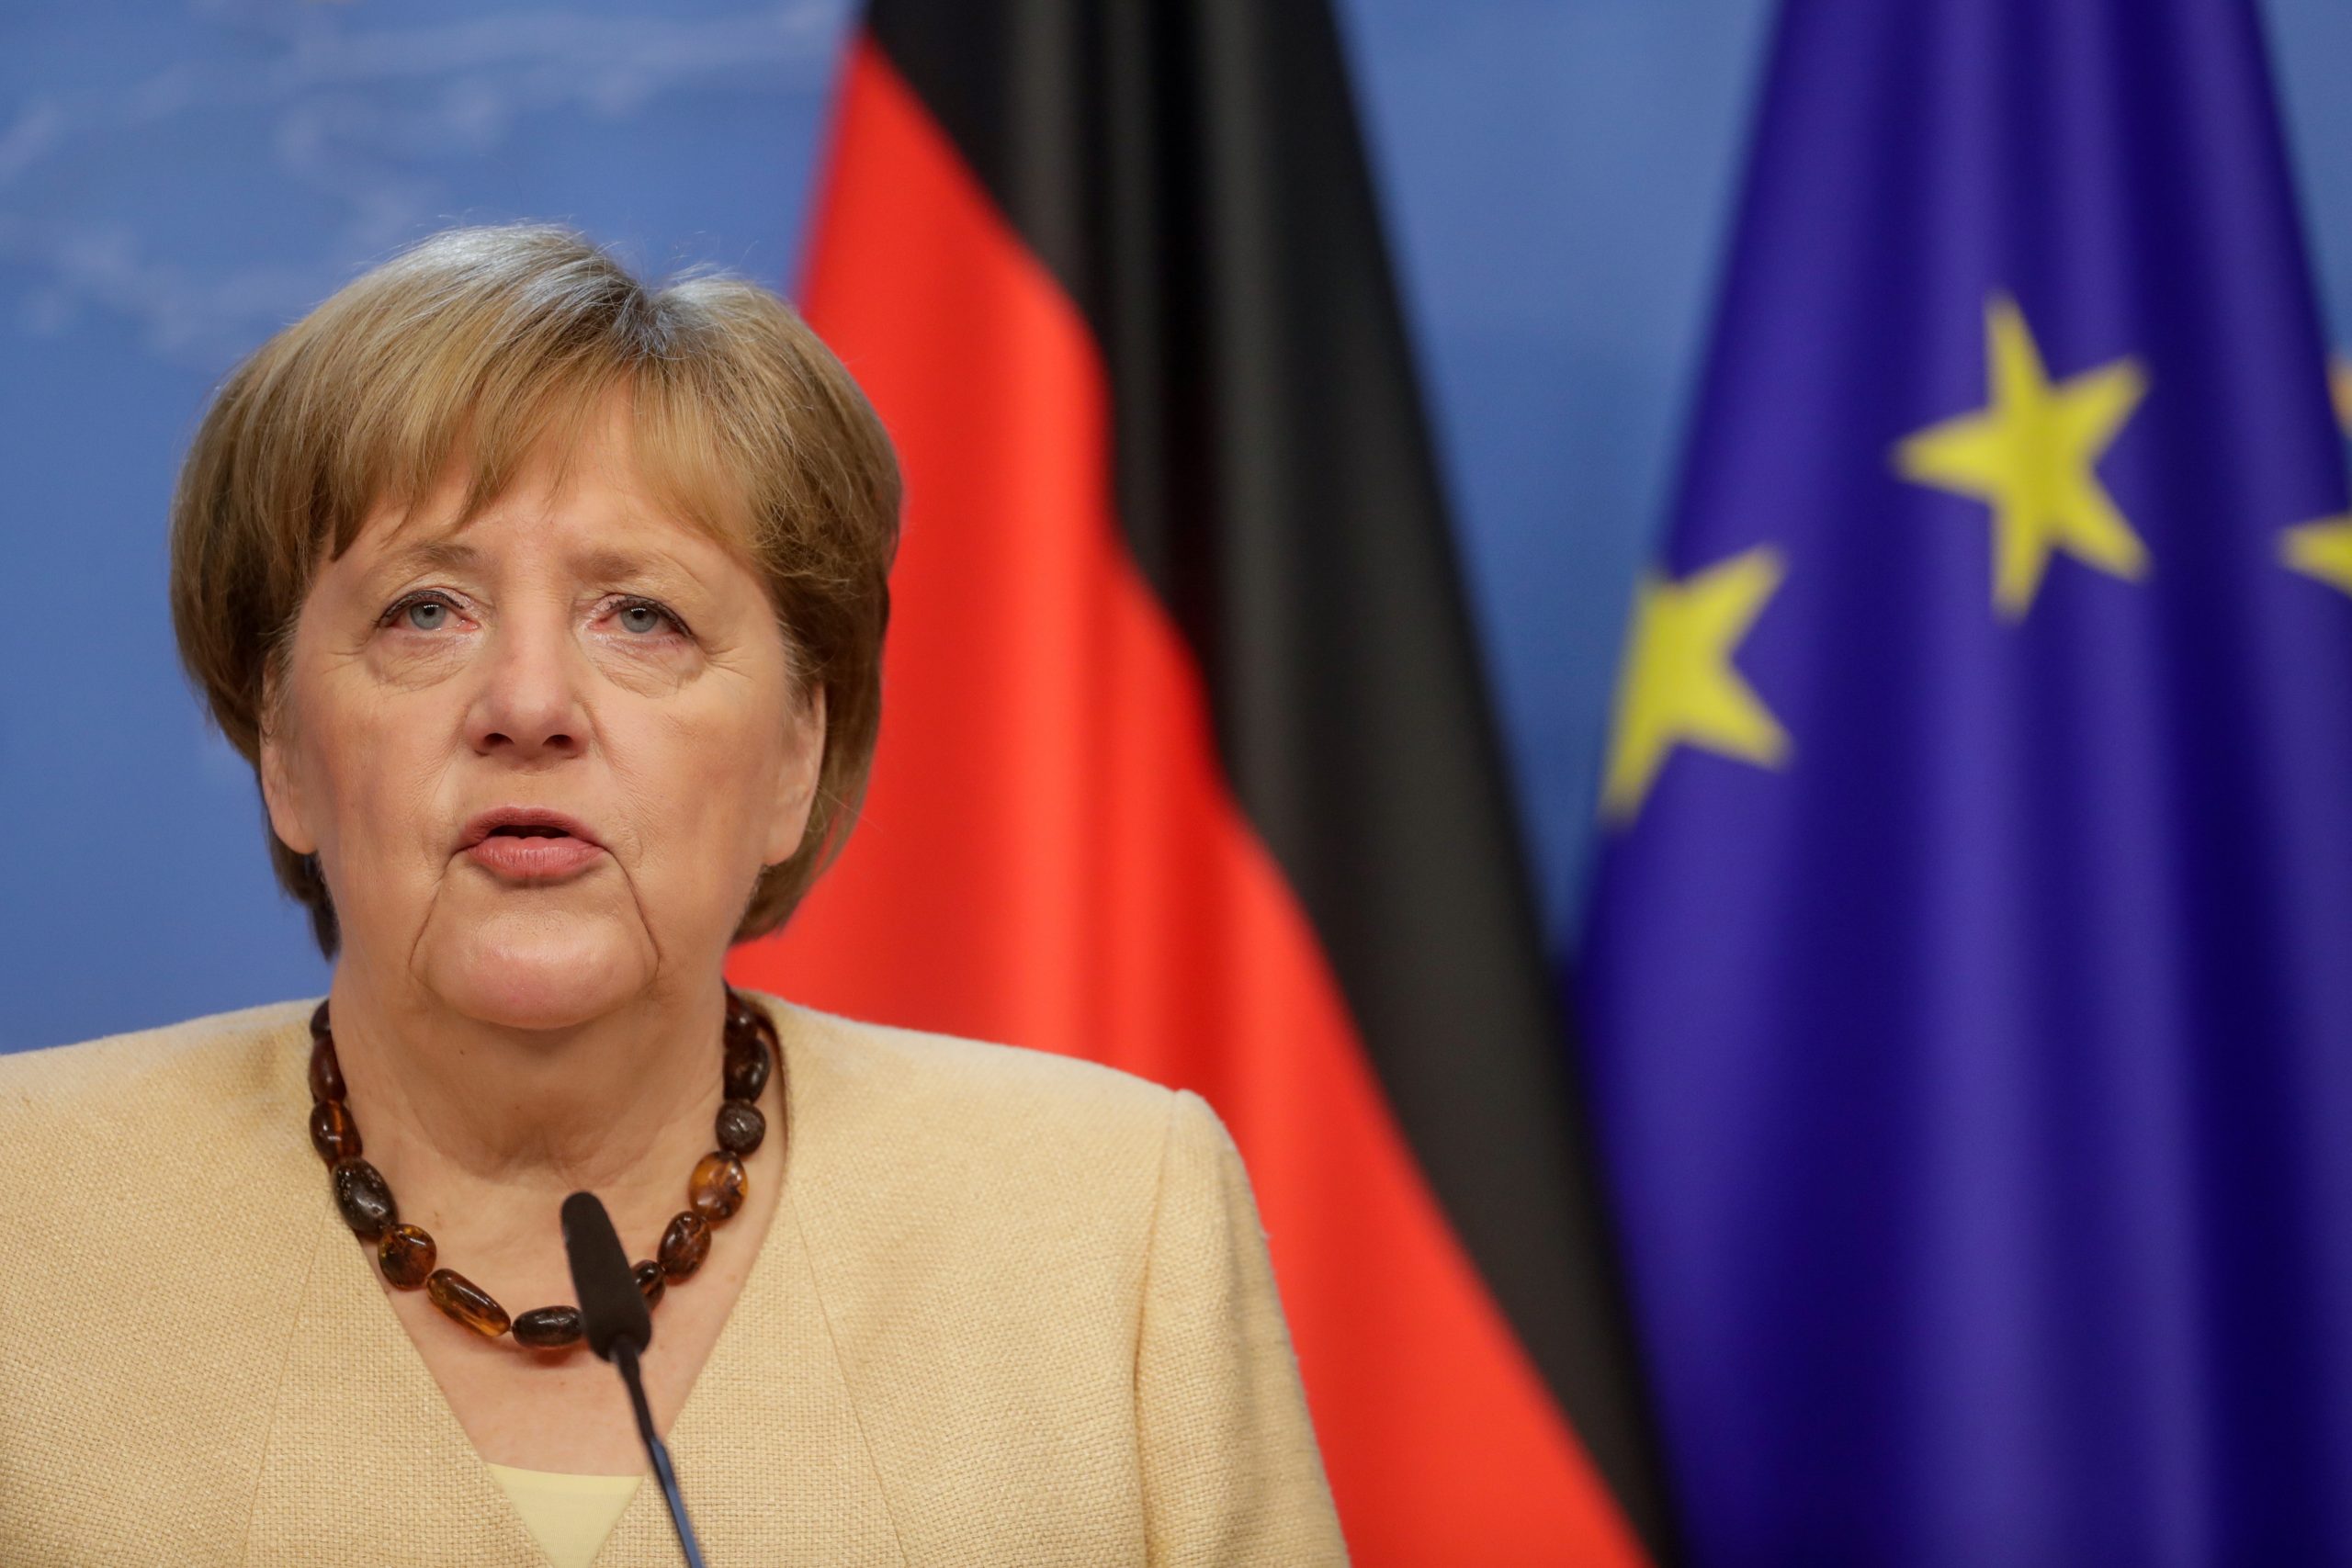 European summit in Brussels Germany's Chancellor Angela Merkel gives a press conference on the second day of a EU summit at the European Council building in Brussels, Belgium June 25, 2021. Stephanie Lecocq/Pool via REUTERS POOL